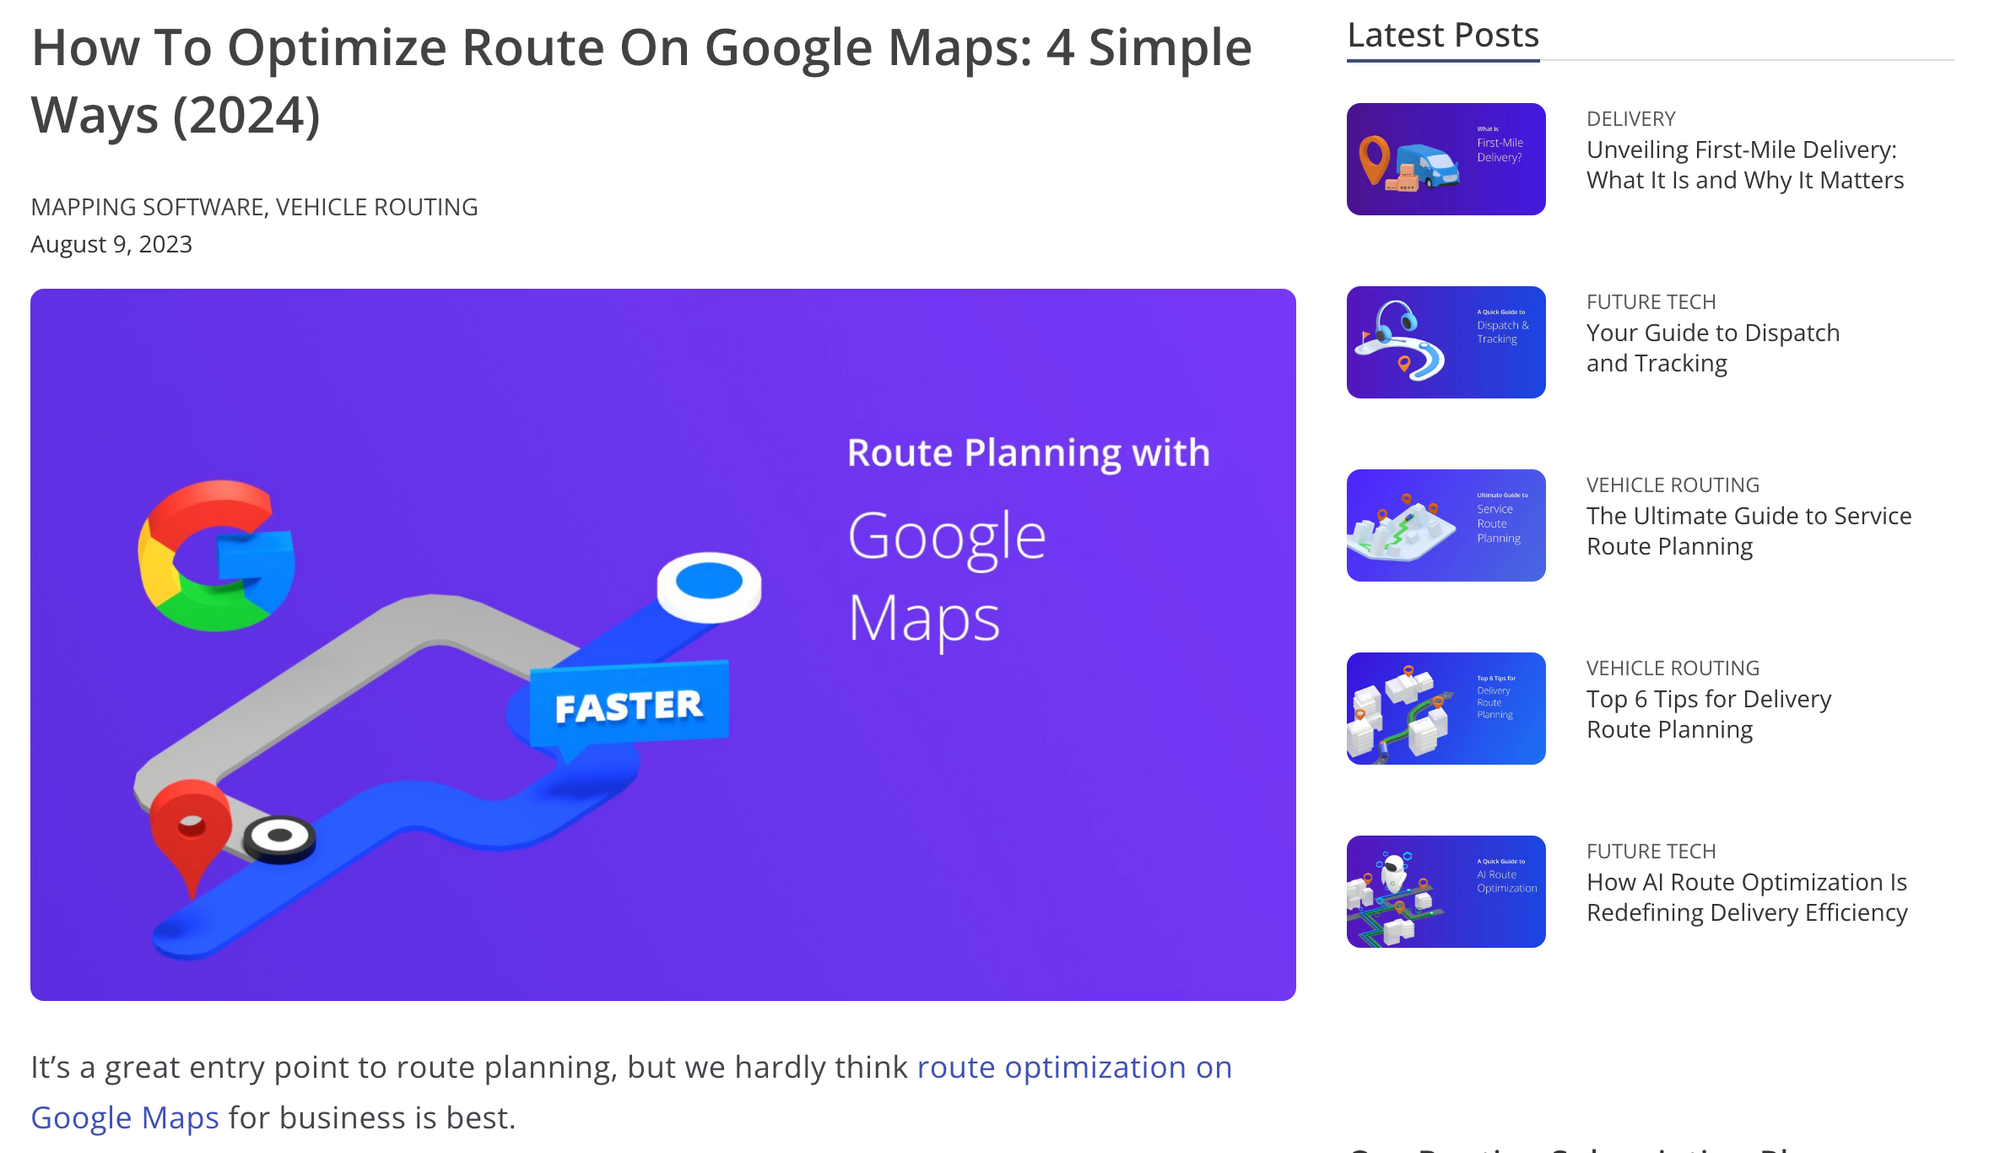 A blog post by a route optimization company highlighting Google Map's 25 waypoint limit